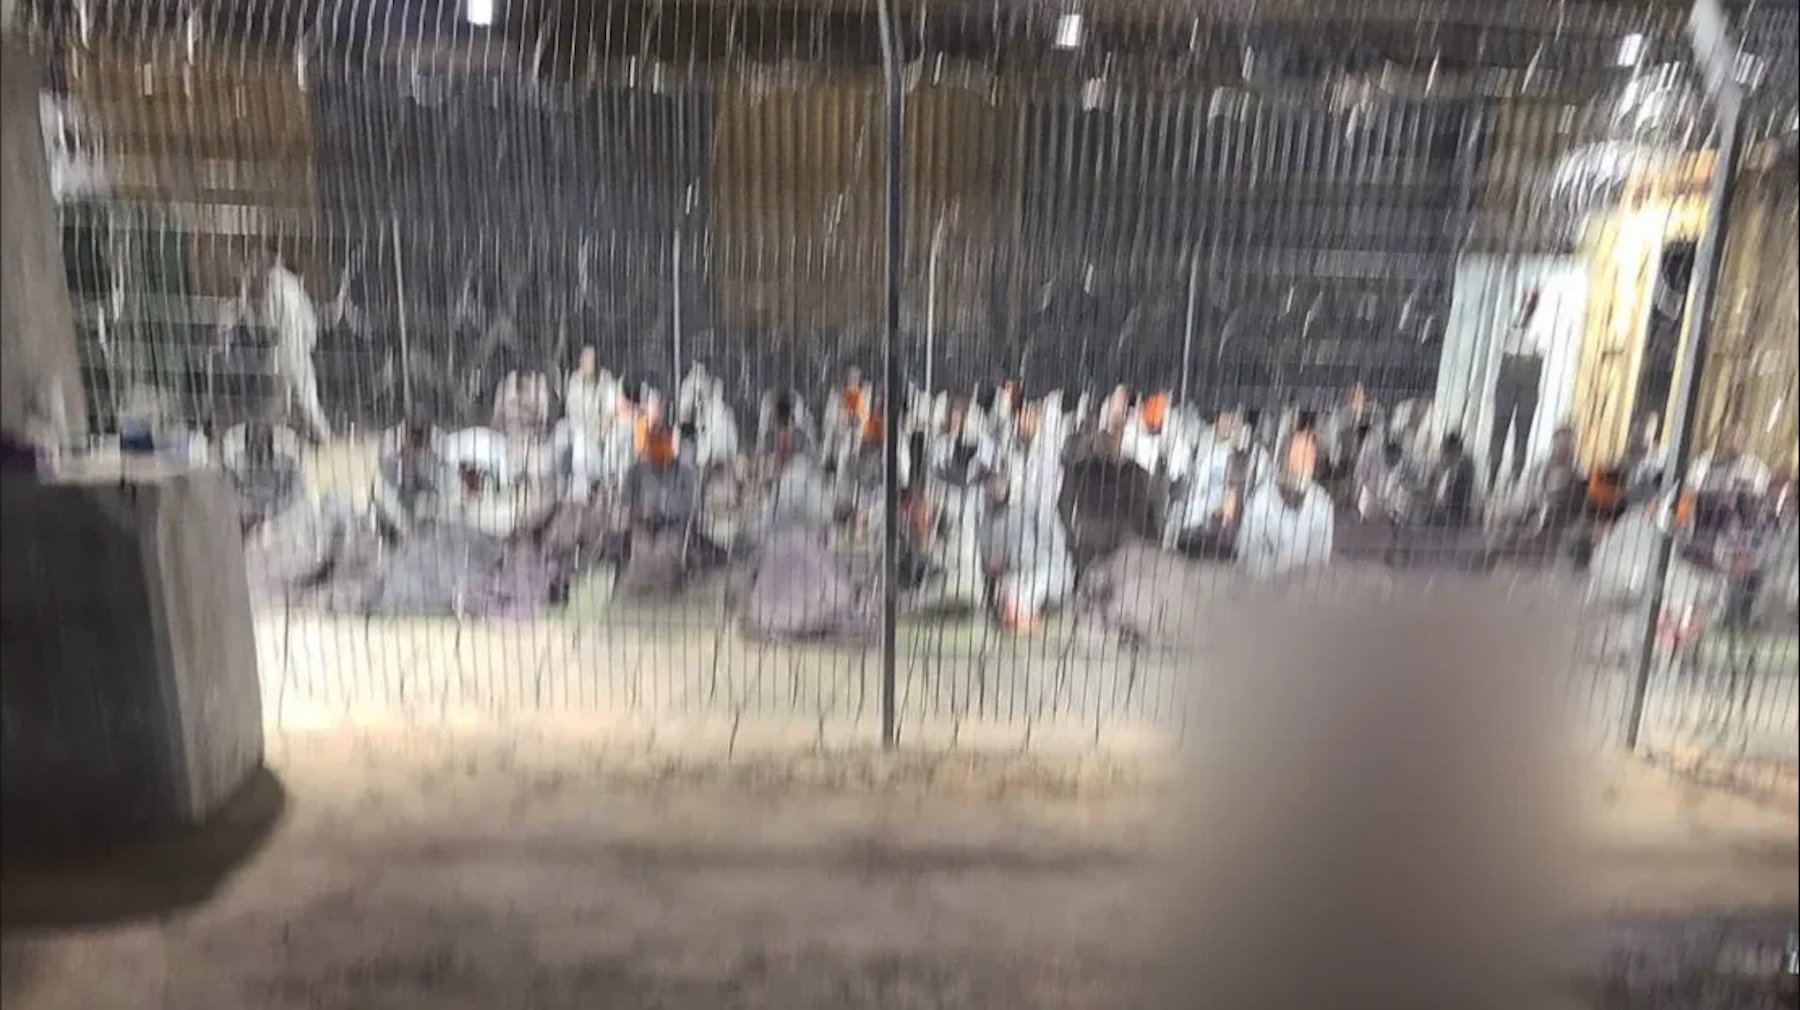 Palestinians at Israel's detention center